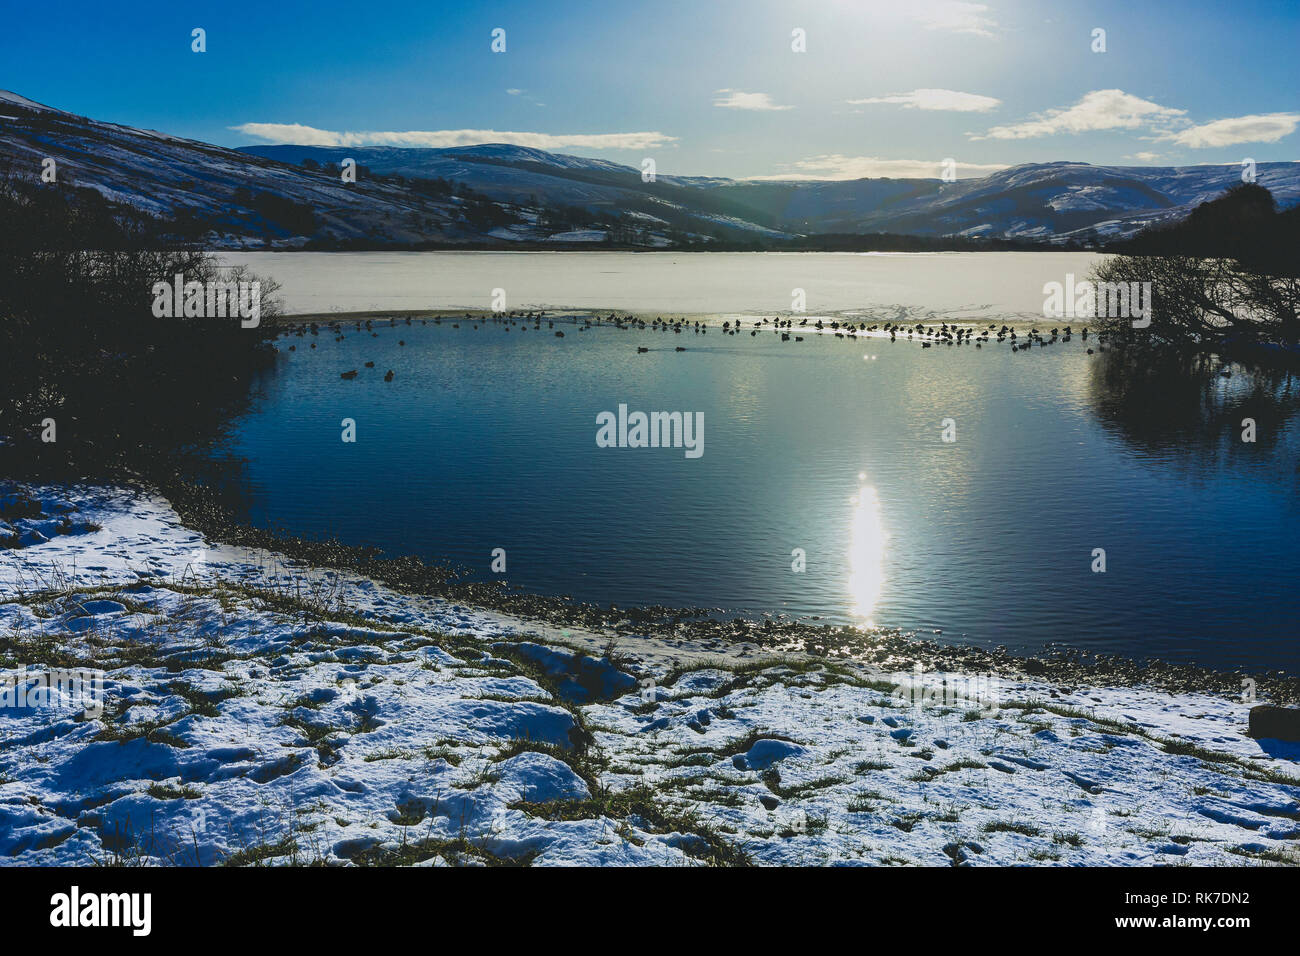 Semerwater in Winter. Semerwater  is the second largest natural lake in North Yorkshire, England, after Malham Tarn. It is half a mile long. Landscape Stock Photo